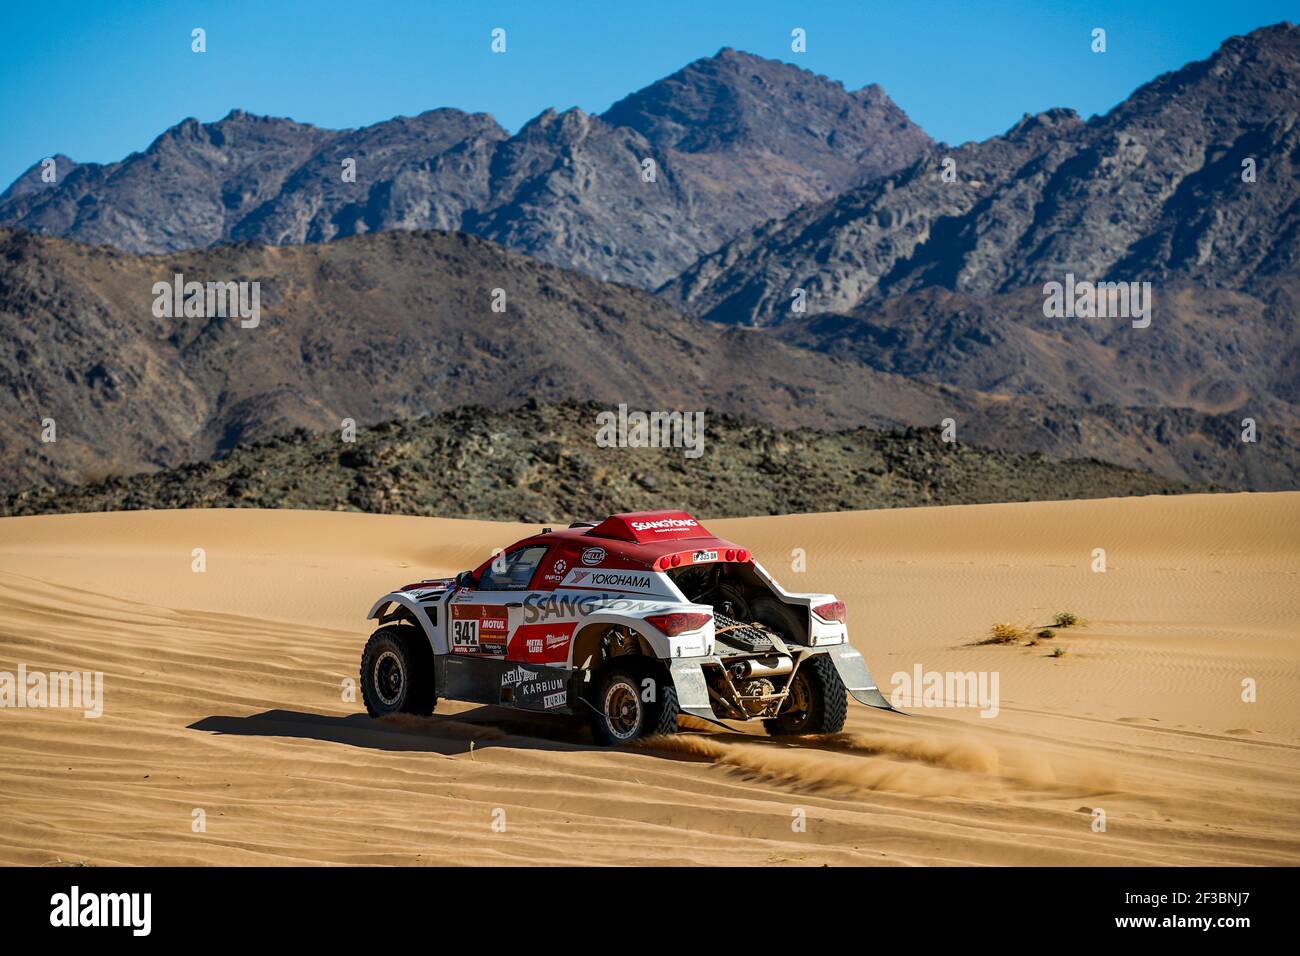 341 Fuertes Aldanondo Oscar (esp), Vallejo Diego (esp), Ssangyoung, Ssangyong Motorsport / Sodicars Racing, Auto, Car, action during Stage 1 of the Dakar 2020 between Jeddah and Al Wajh, 752 km - SS 319km, in Saudi Arabia, on January 5, 2020 - Photo Florent Gooden / DPPI Stock Photo